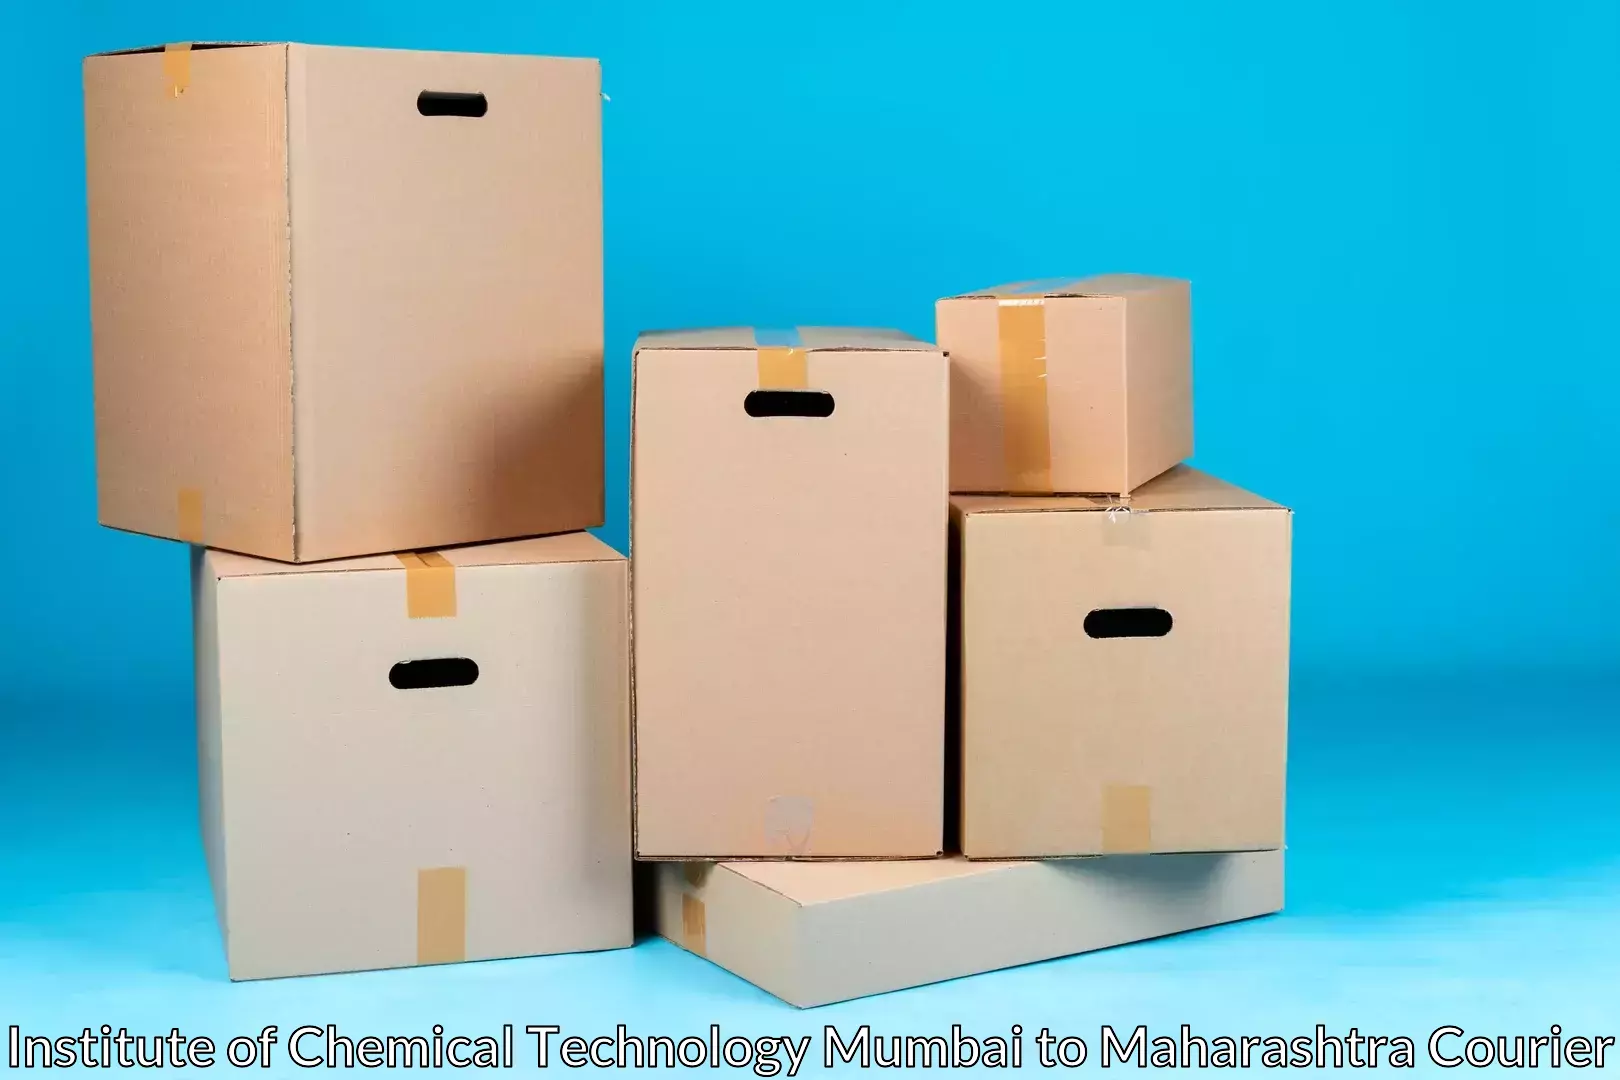 Customized moving solutions Institute of Chemical Technology Mumbai to Kalyan